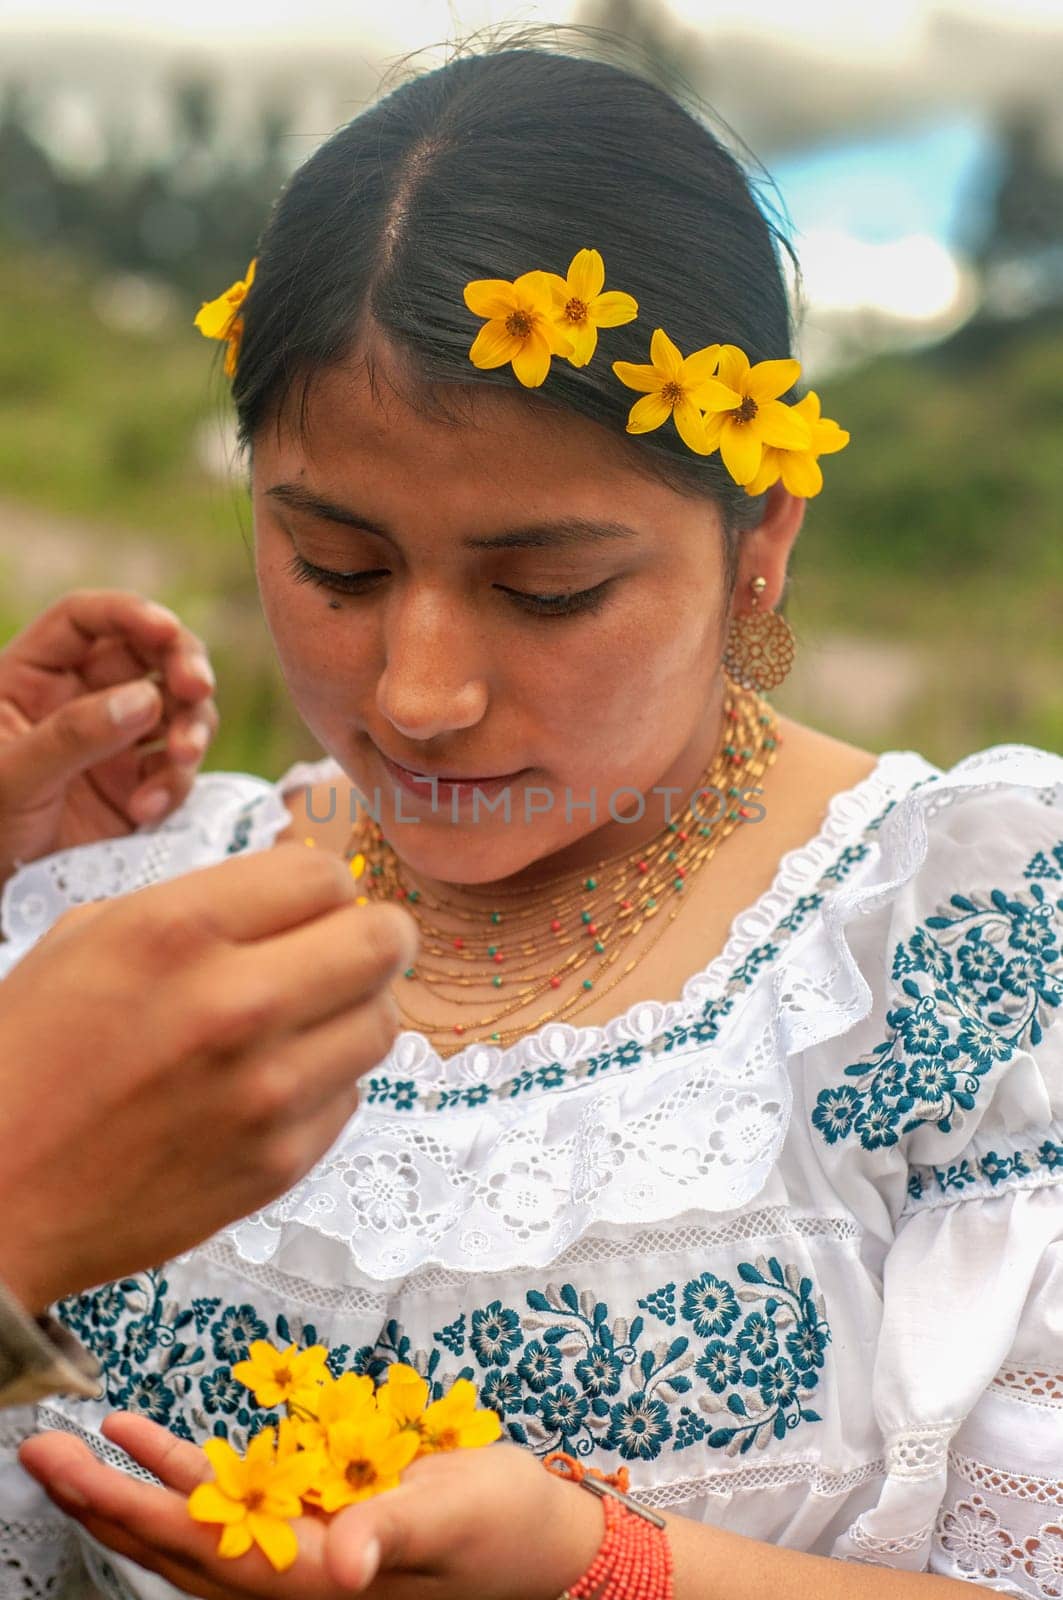 Young Ecuadorian Woman Adorning Herself With Yellow Flowers in the Countryside by Raulmartin